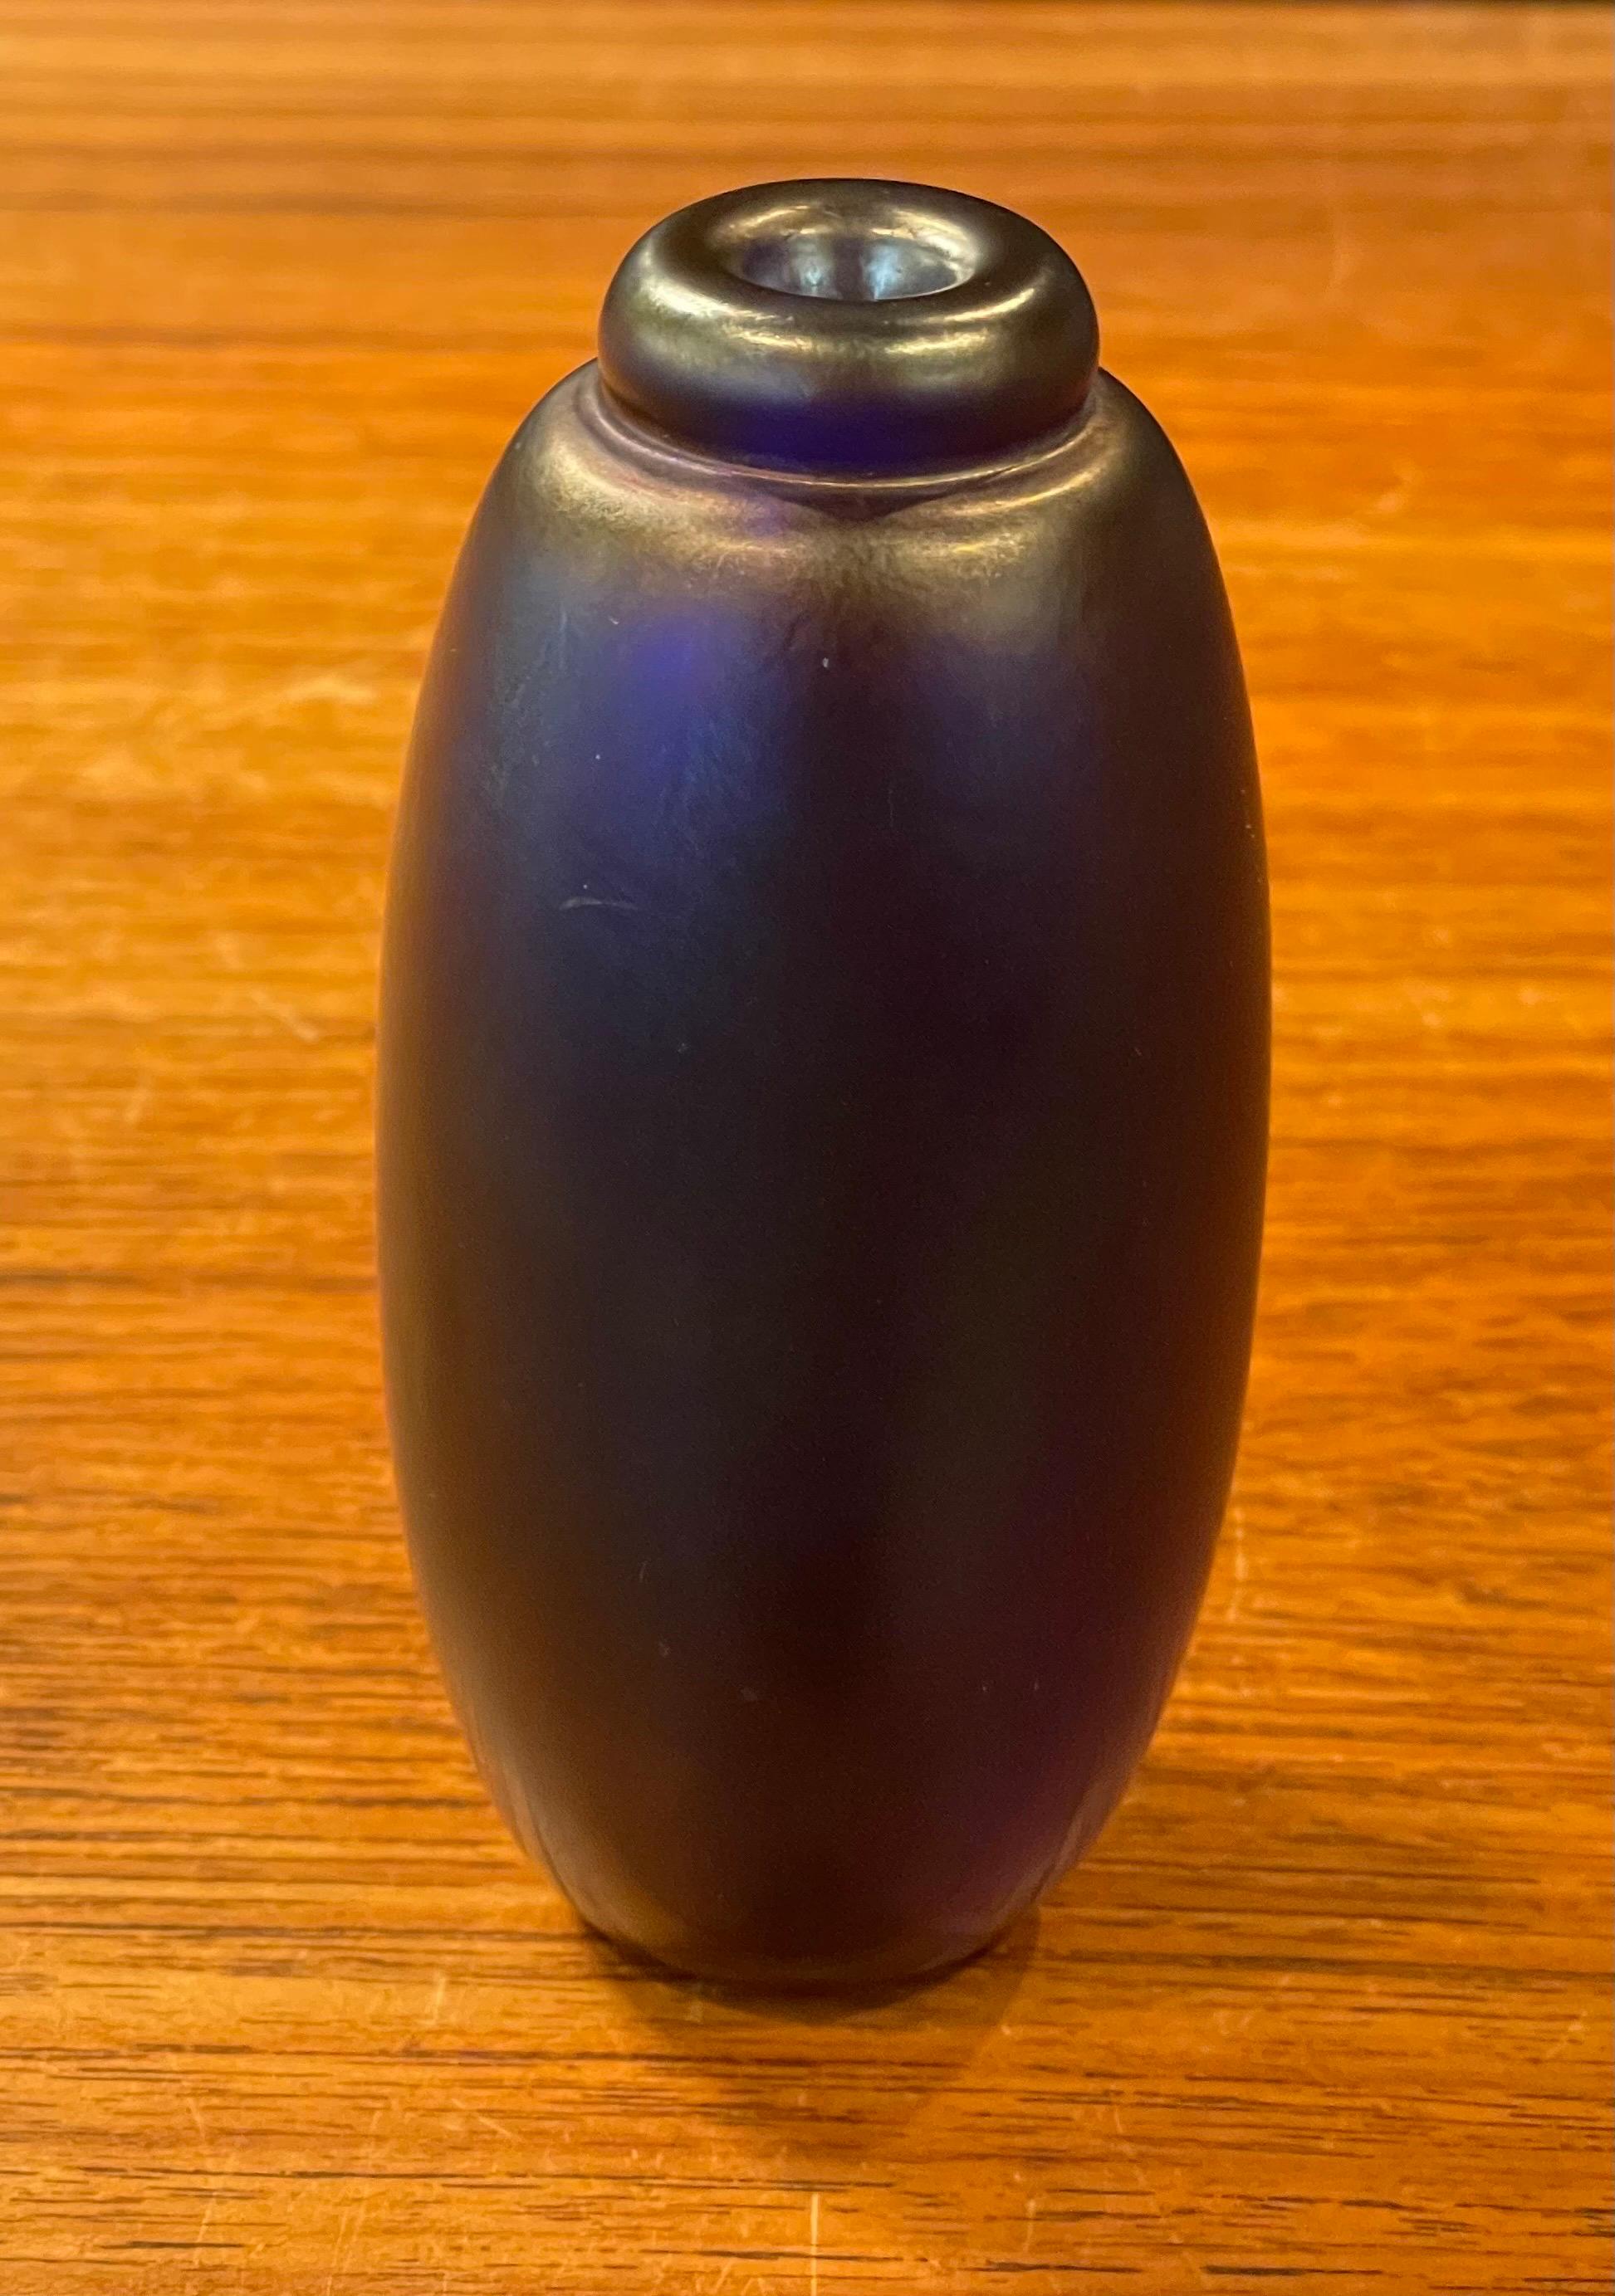 Small Iridescent Art Glass Bud Vase, circa 1970s.  This vase is in very good vintage condition with no chips or cracks and measures 2.25